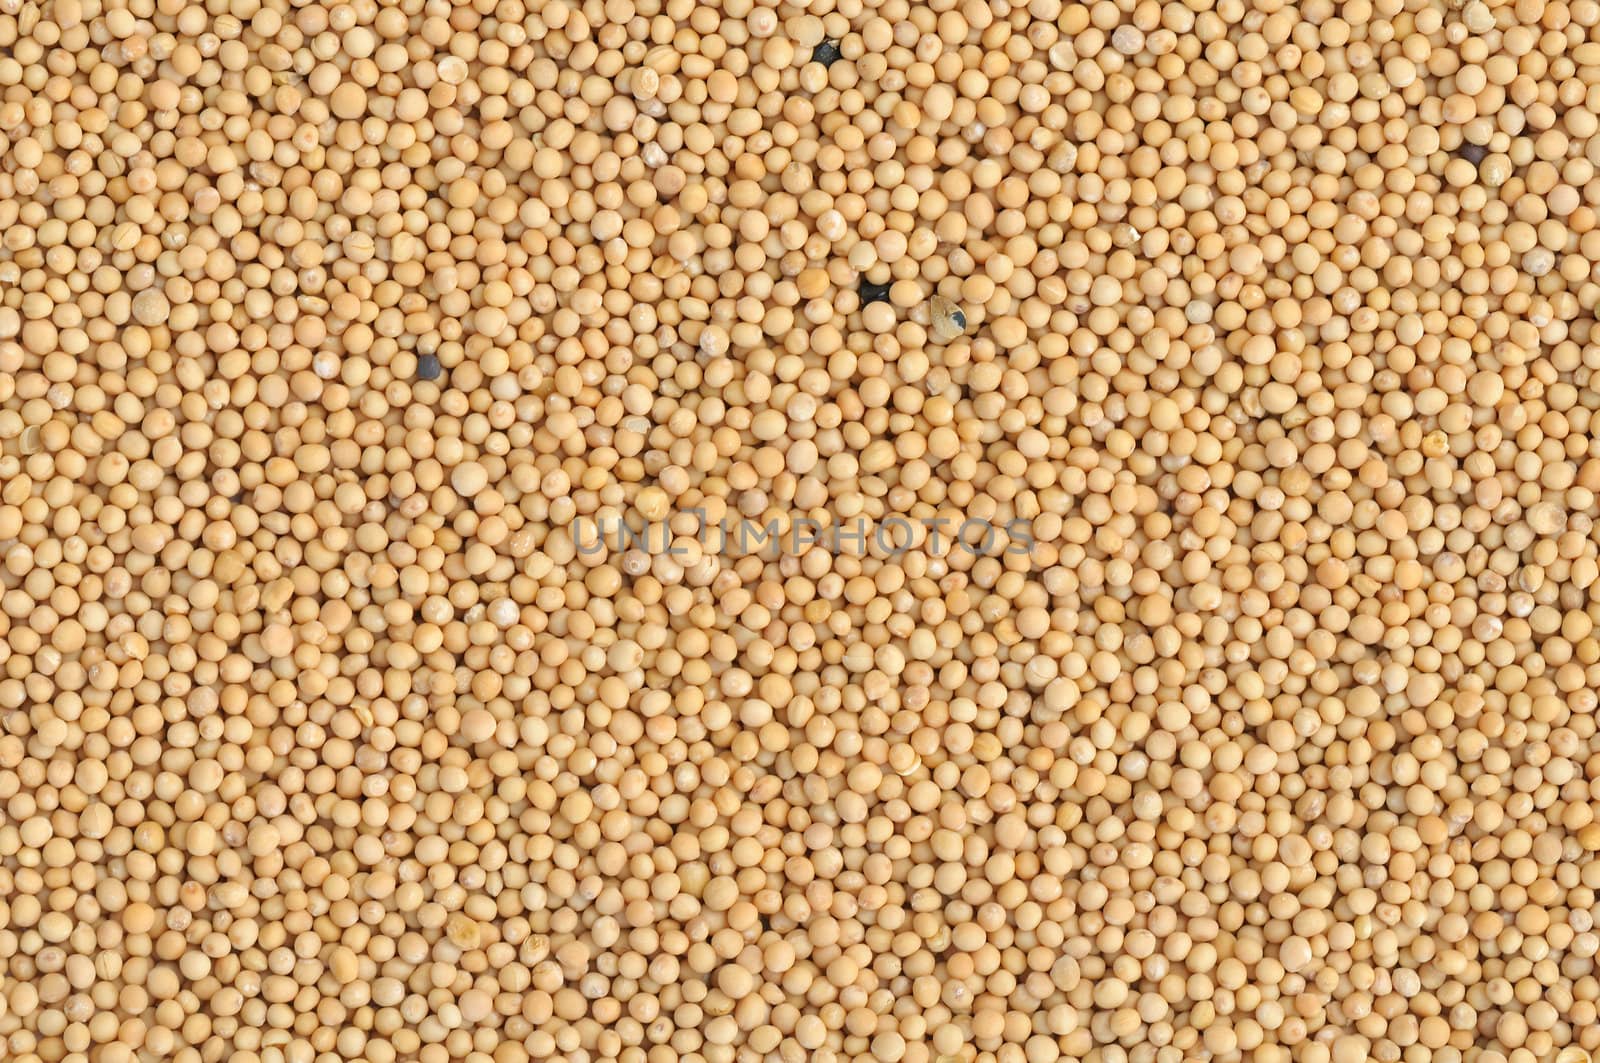 Top view of mustard seeds in natural light